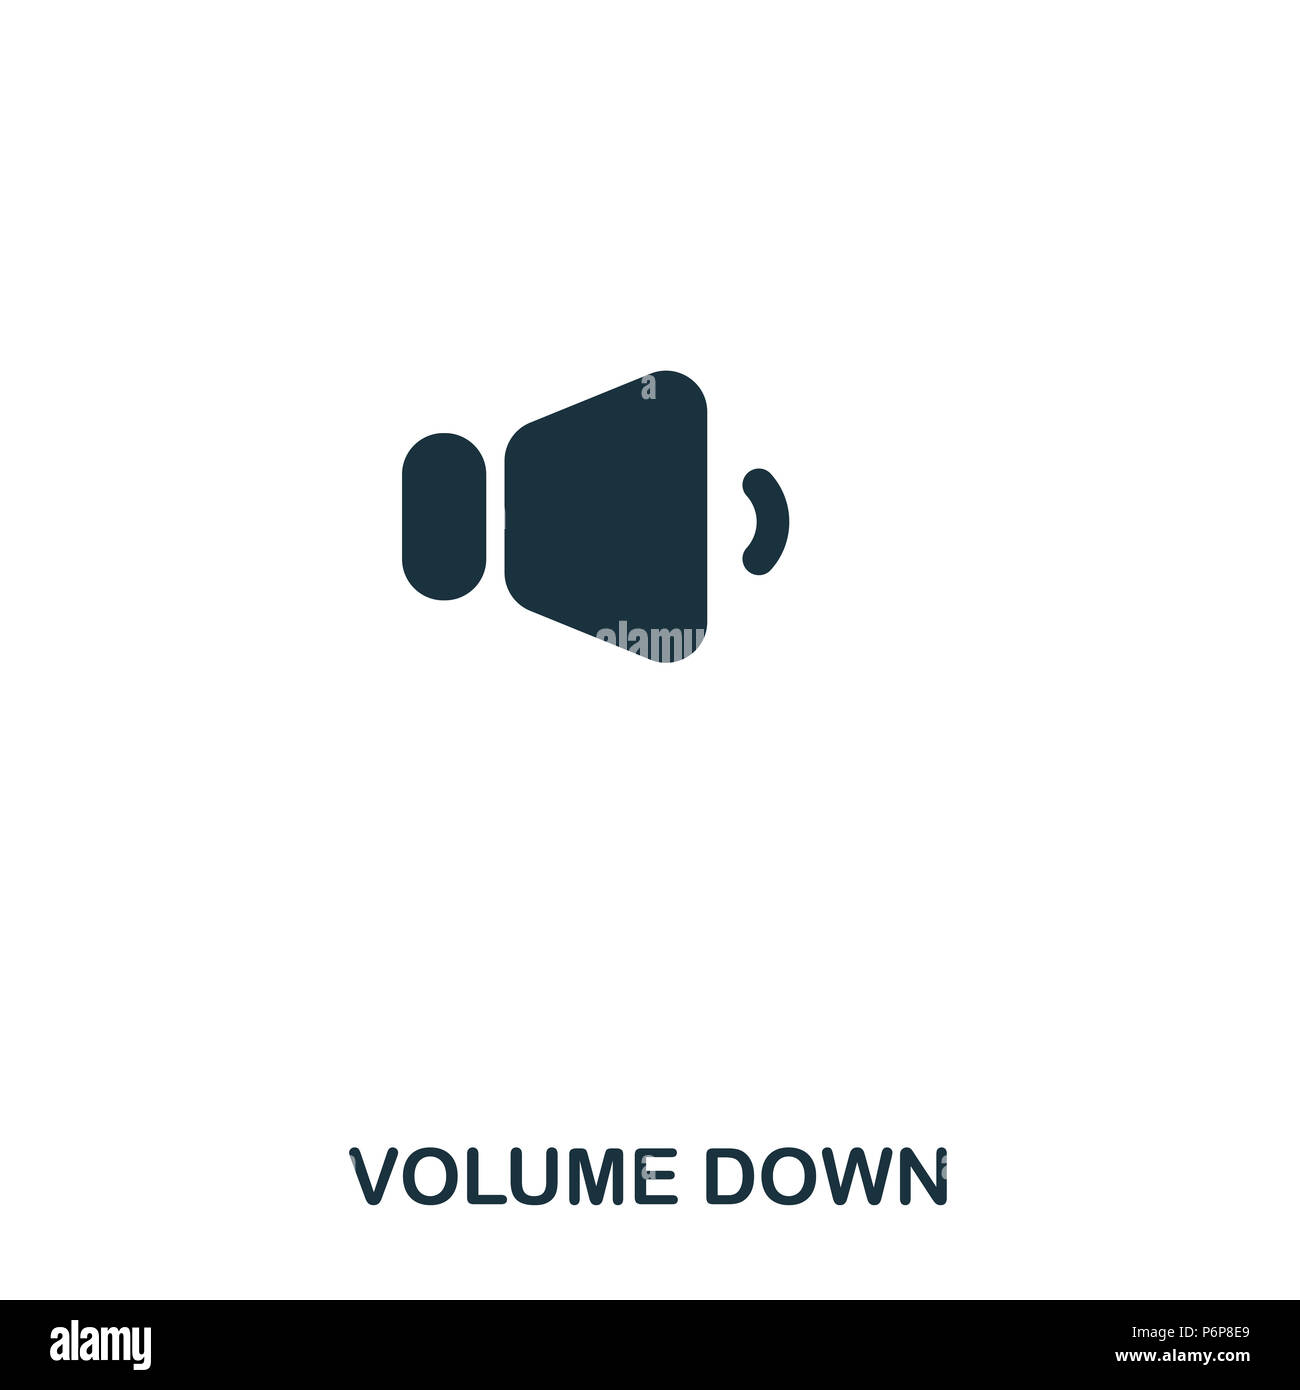 Volume Down icon. Line style icon design. UI. Illustration of volume down icon. Pictogram isolated on white. Ready to use in web design, apps, softwar Stock Photo